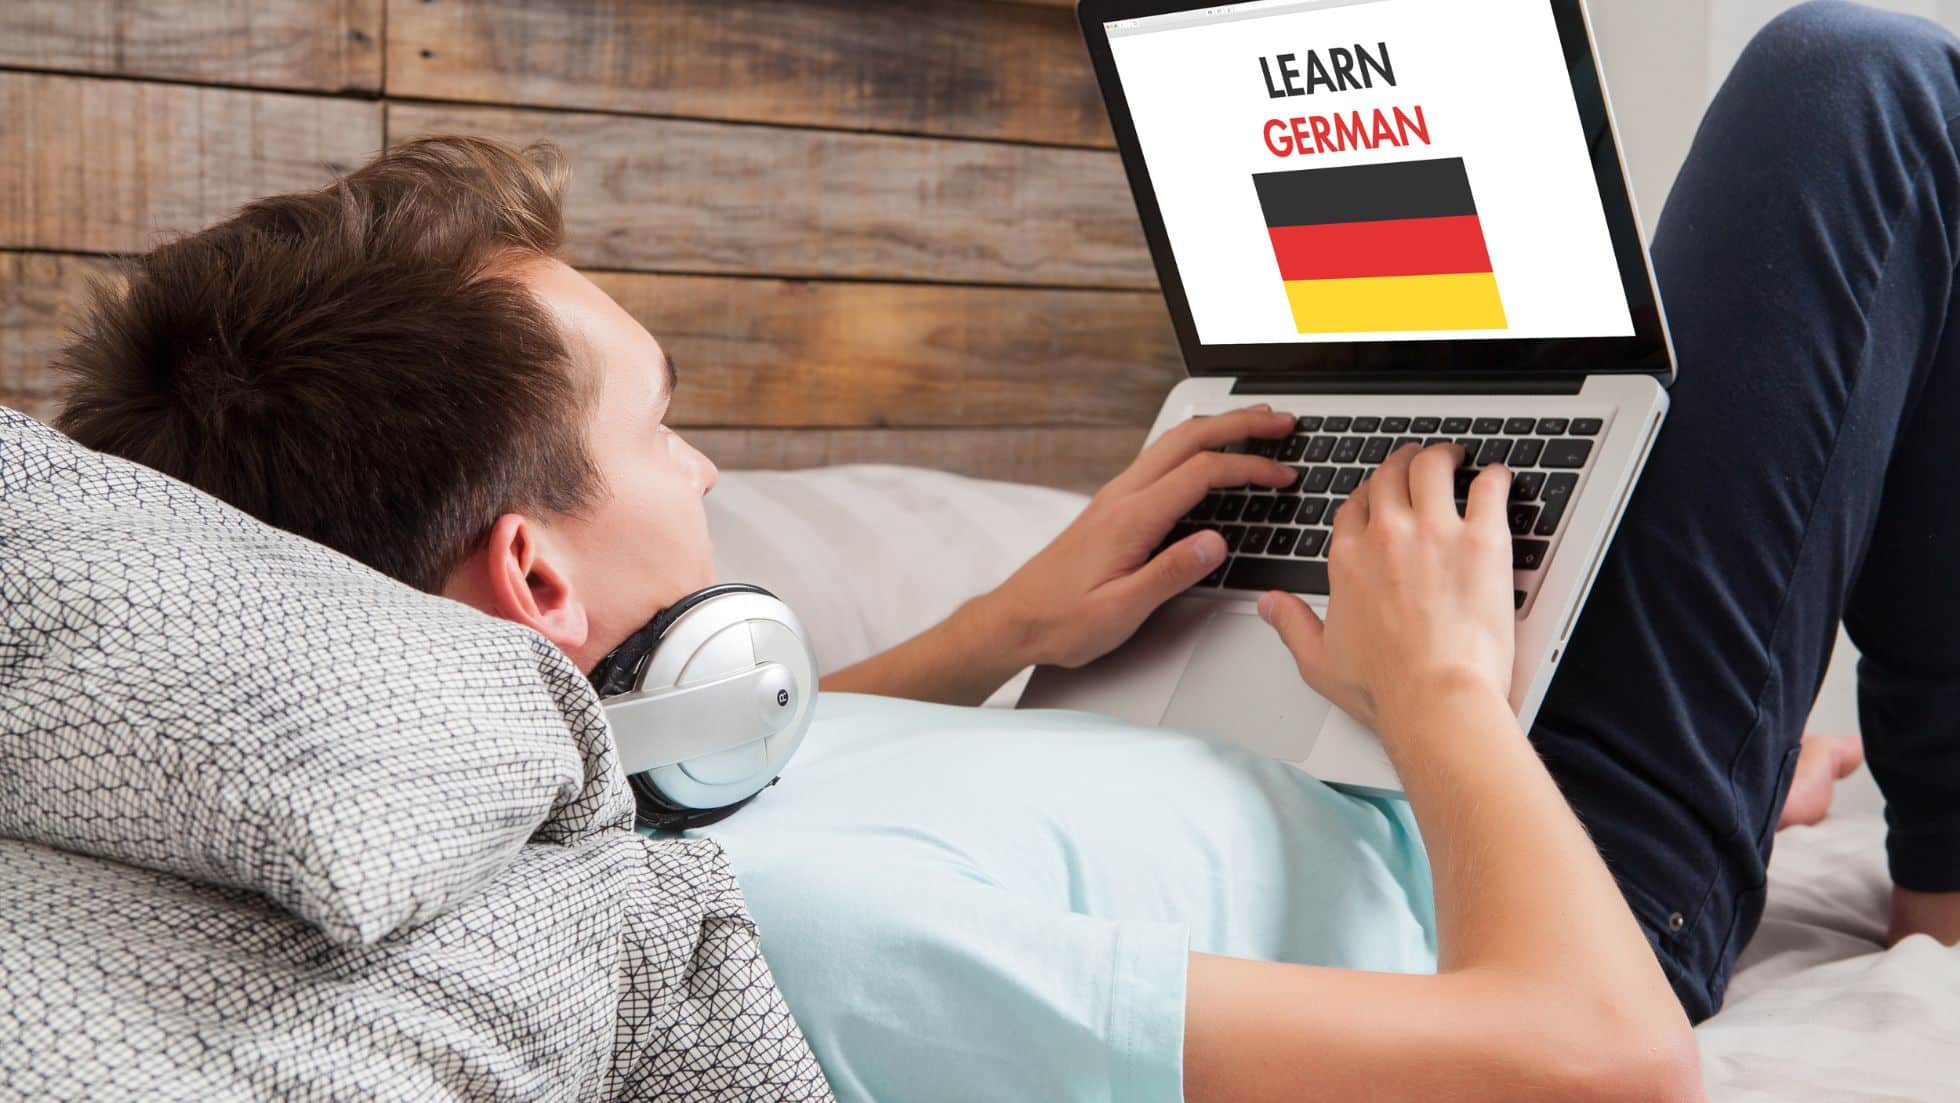 8 Steps to Master the German Language Faster than You Think